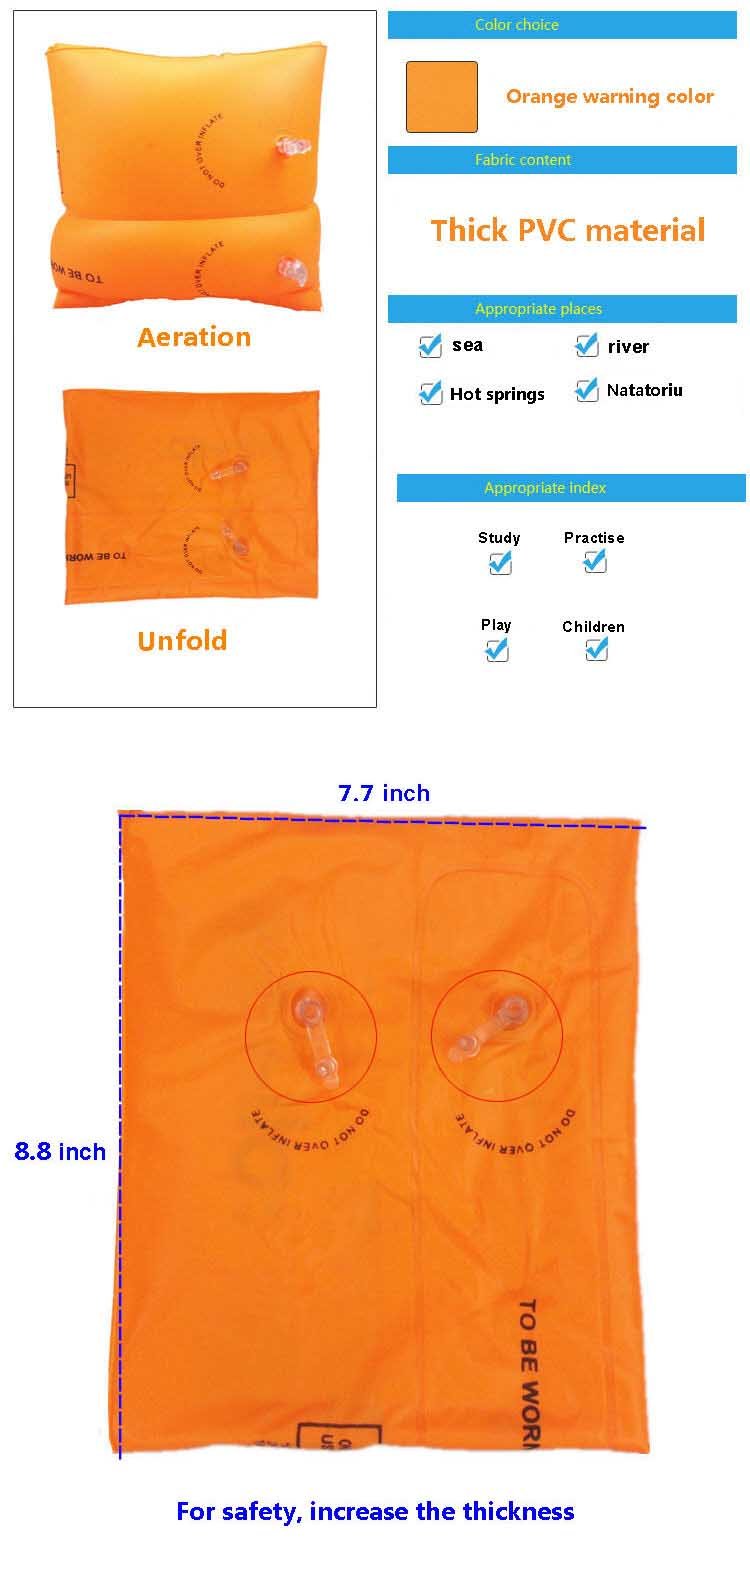 Topsung Floaties Inflatable Swim Arm Bands Rings Floats Tube Armlets for Kids and Adult Orange